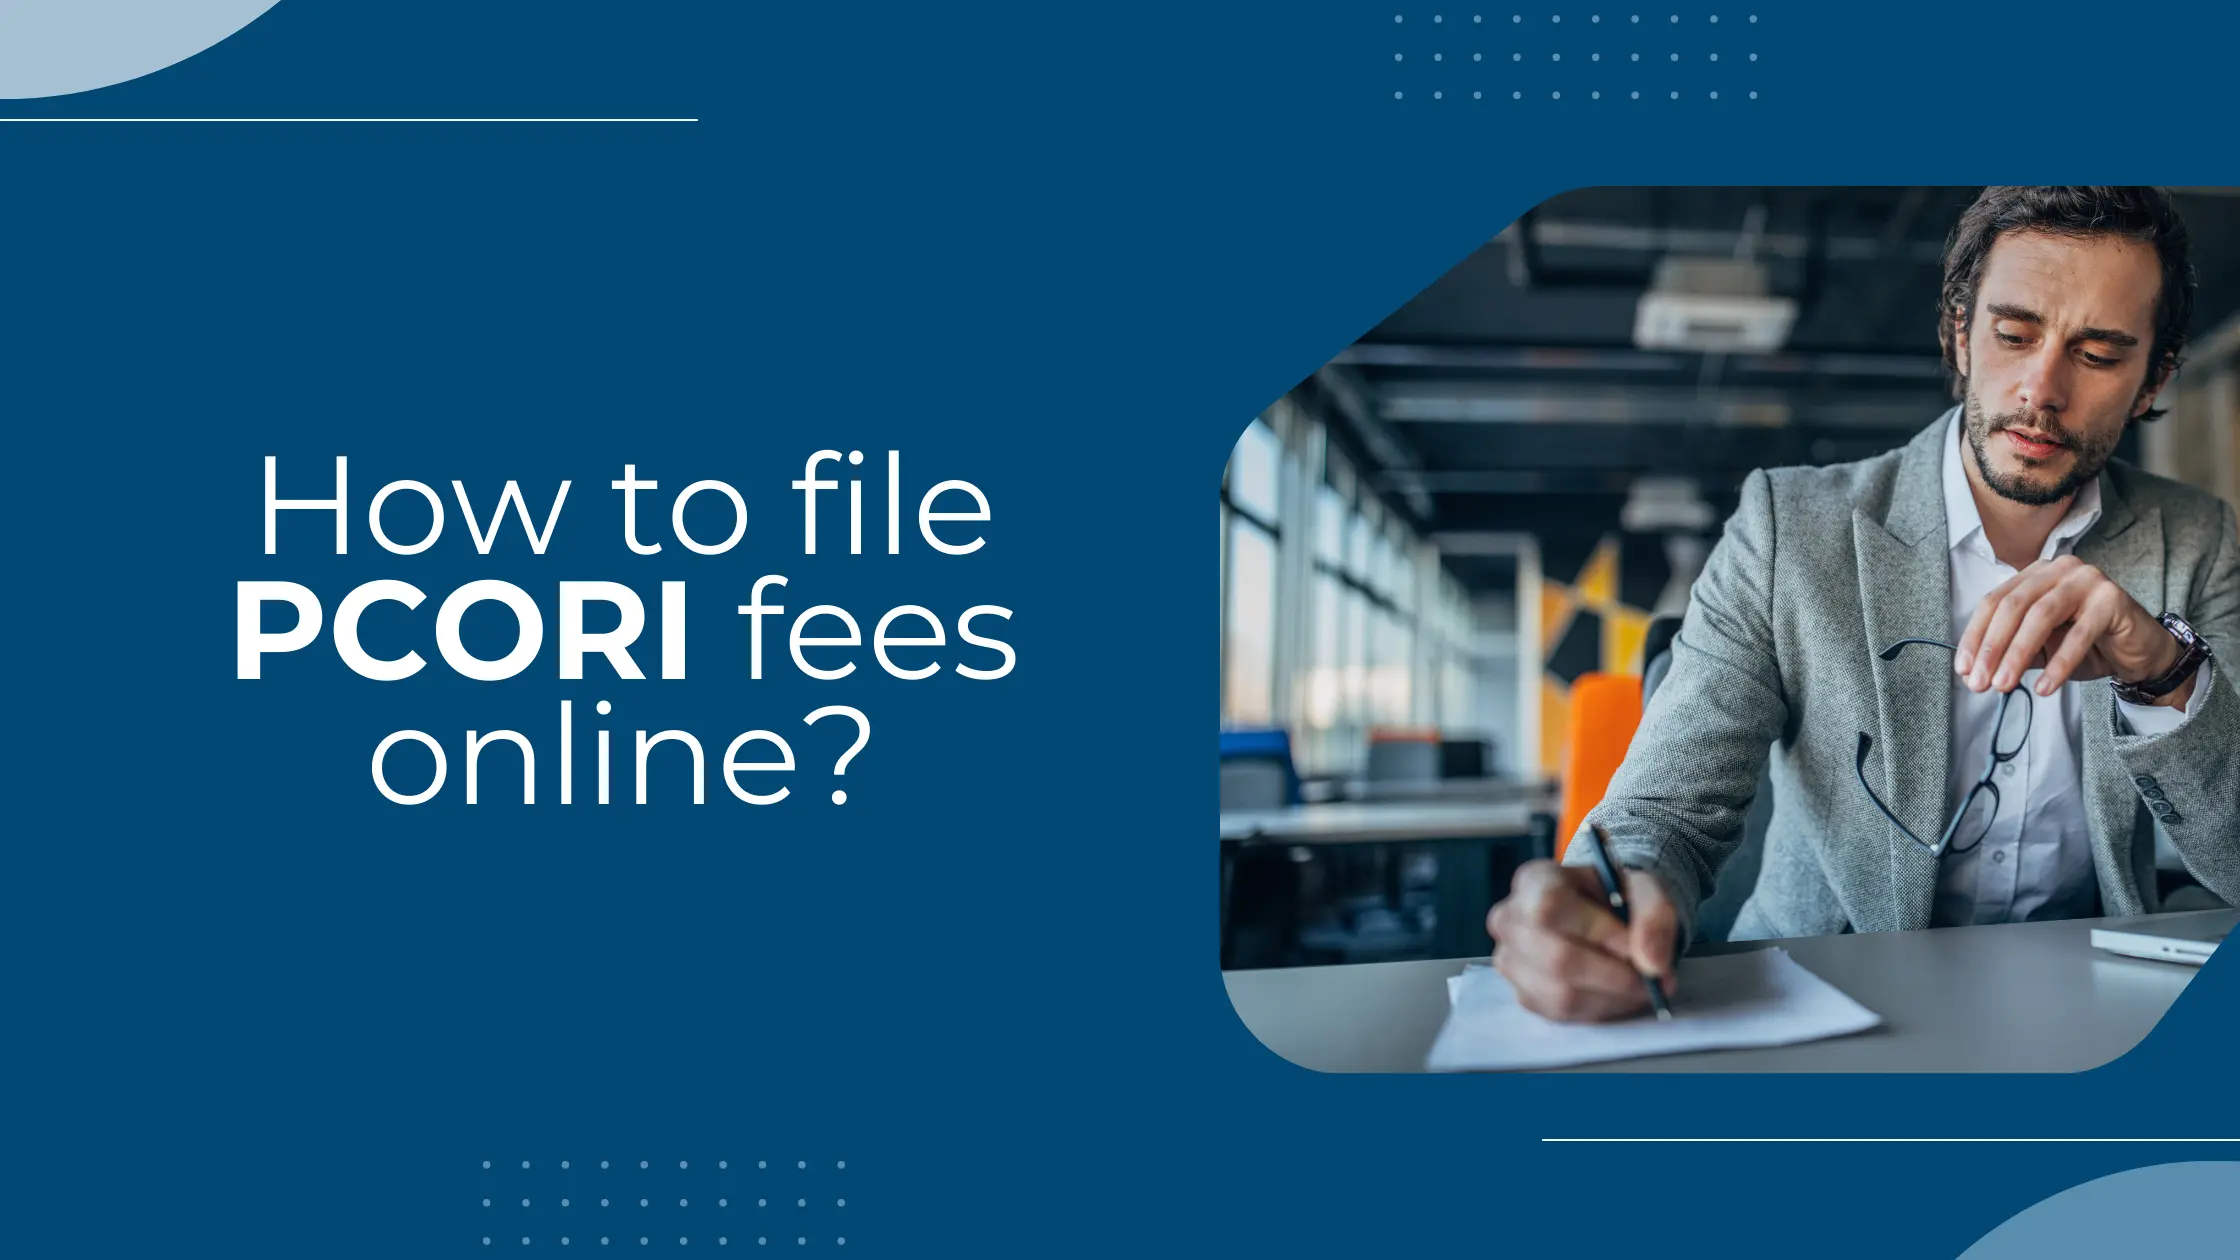 How to File PCORI Fees Online